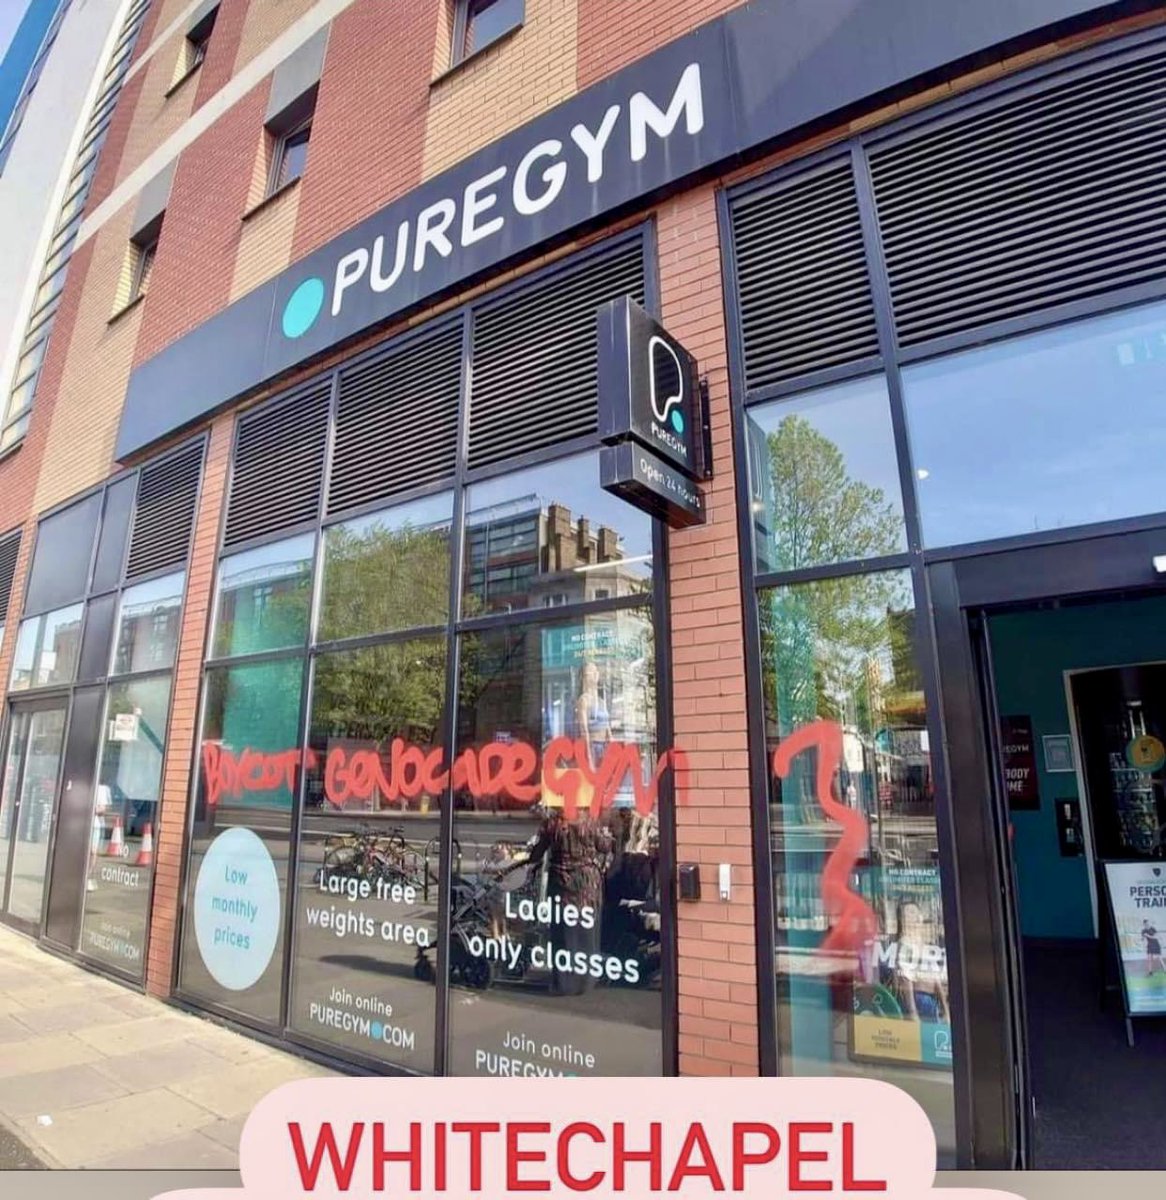 @5Pillarsuk @PureGym To all those that claim they will be joining, in reality you won’t be joining. Stop making yourself look stupid. Anyhow this was #Whitechapel #EastLondon this beautiful afternoon 🇵🇸